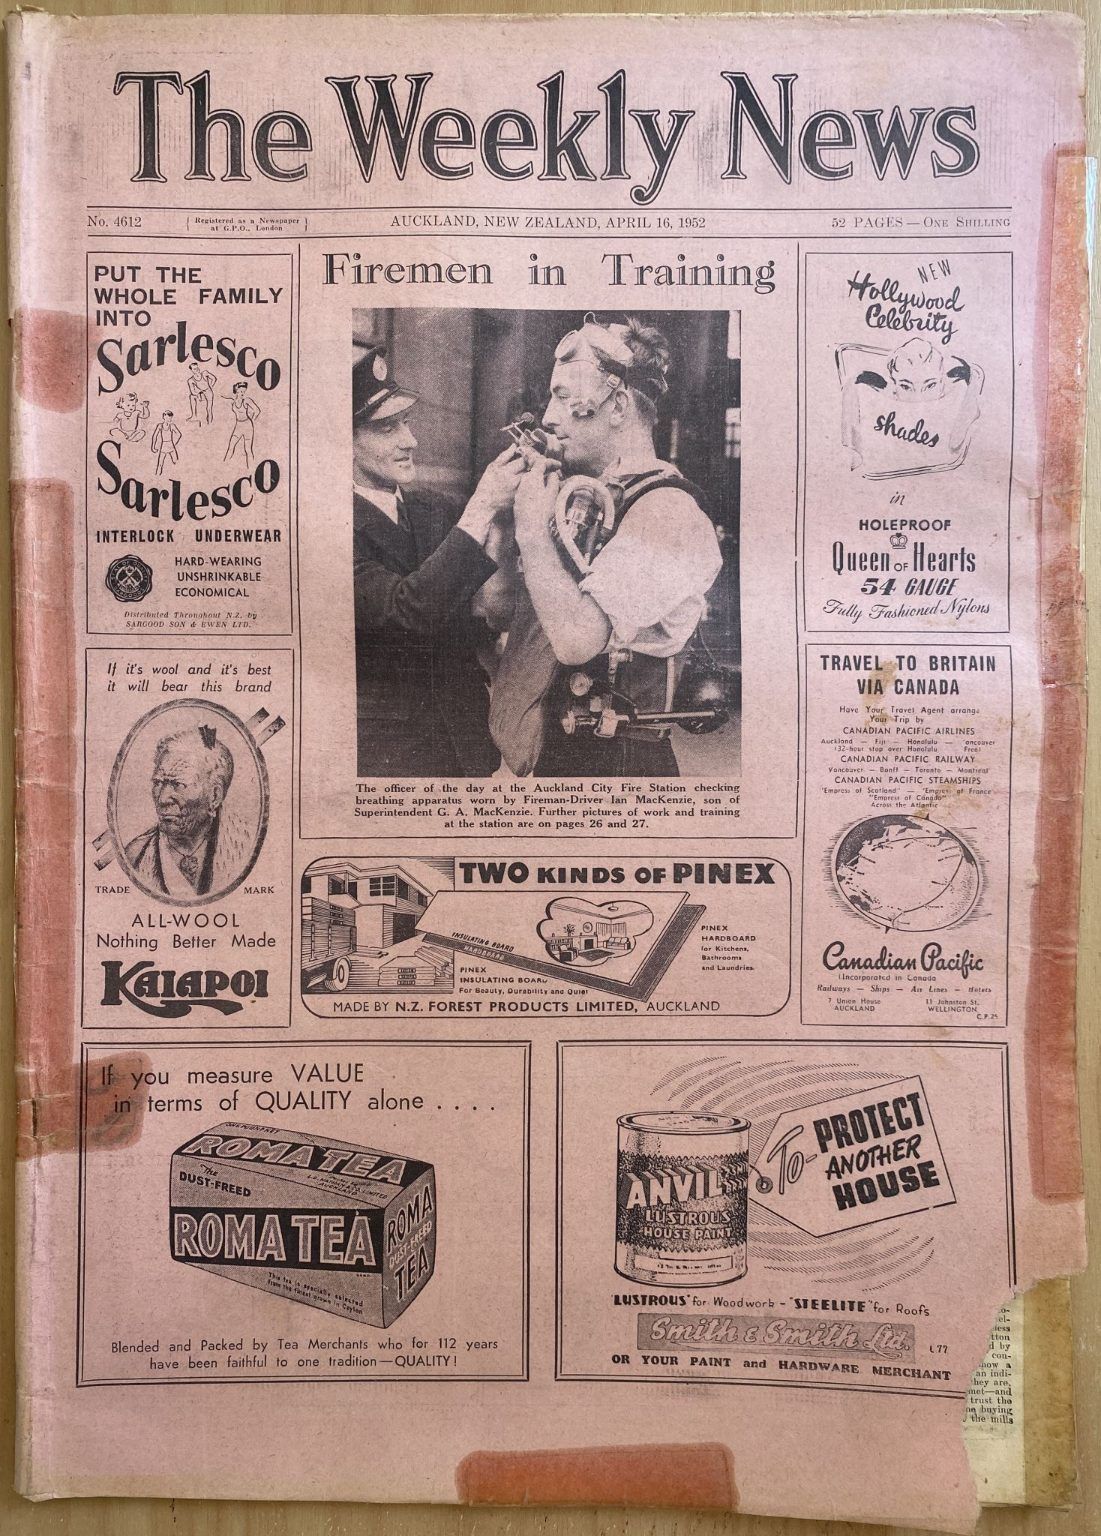 OLD NEWSPAPER: The Weekly News - No. 4612, 16 April 1952